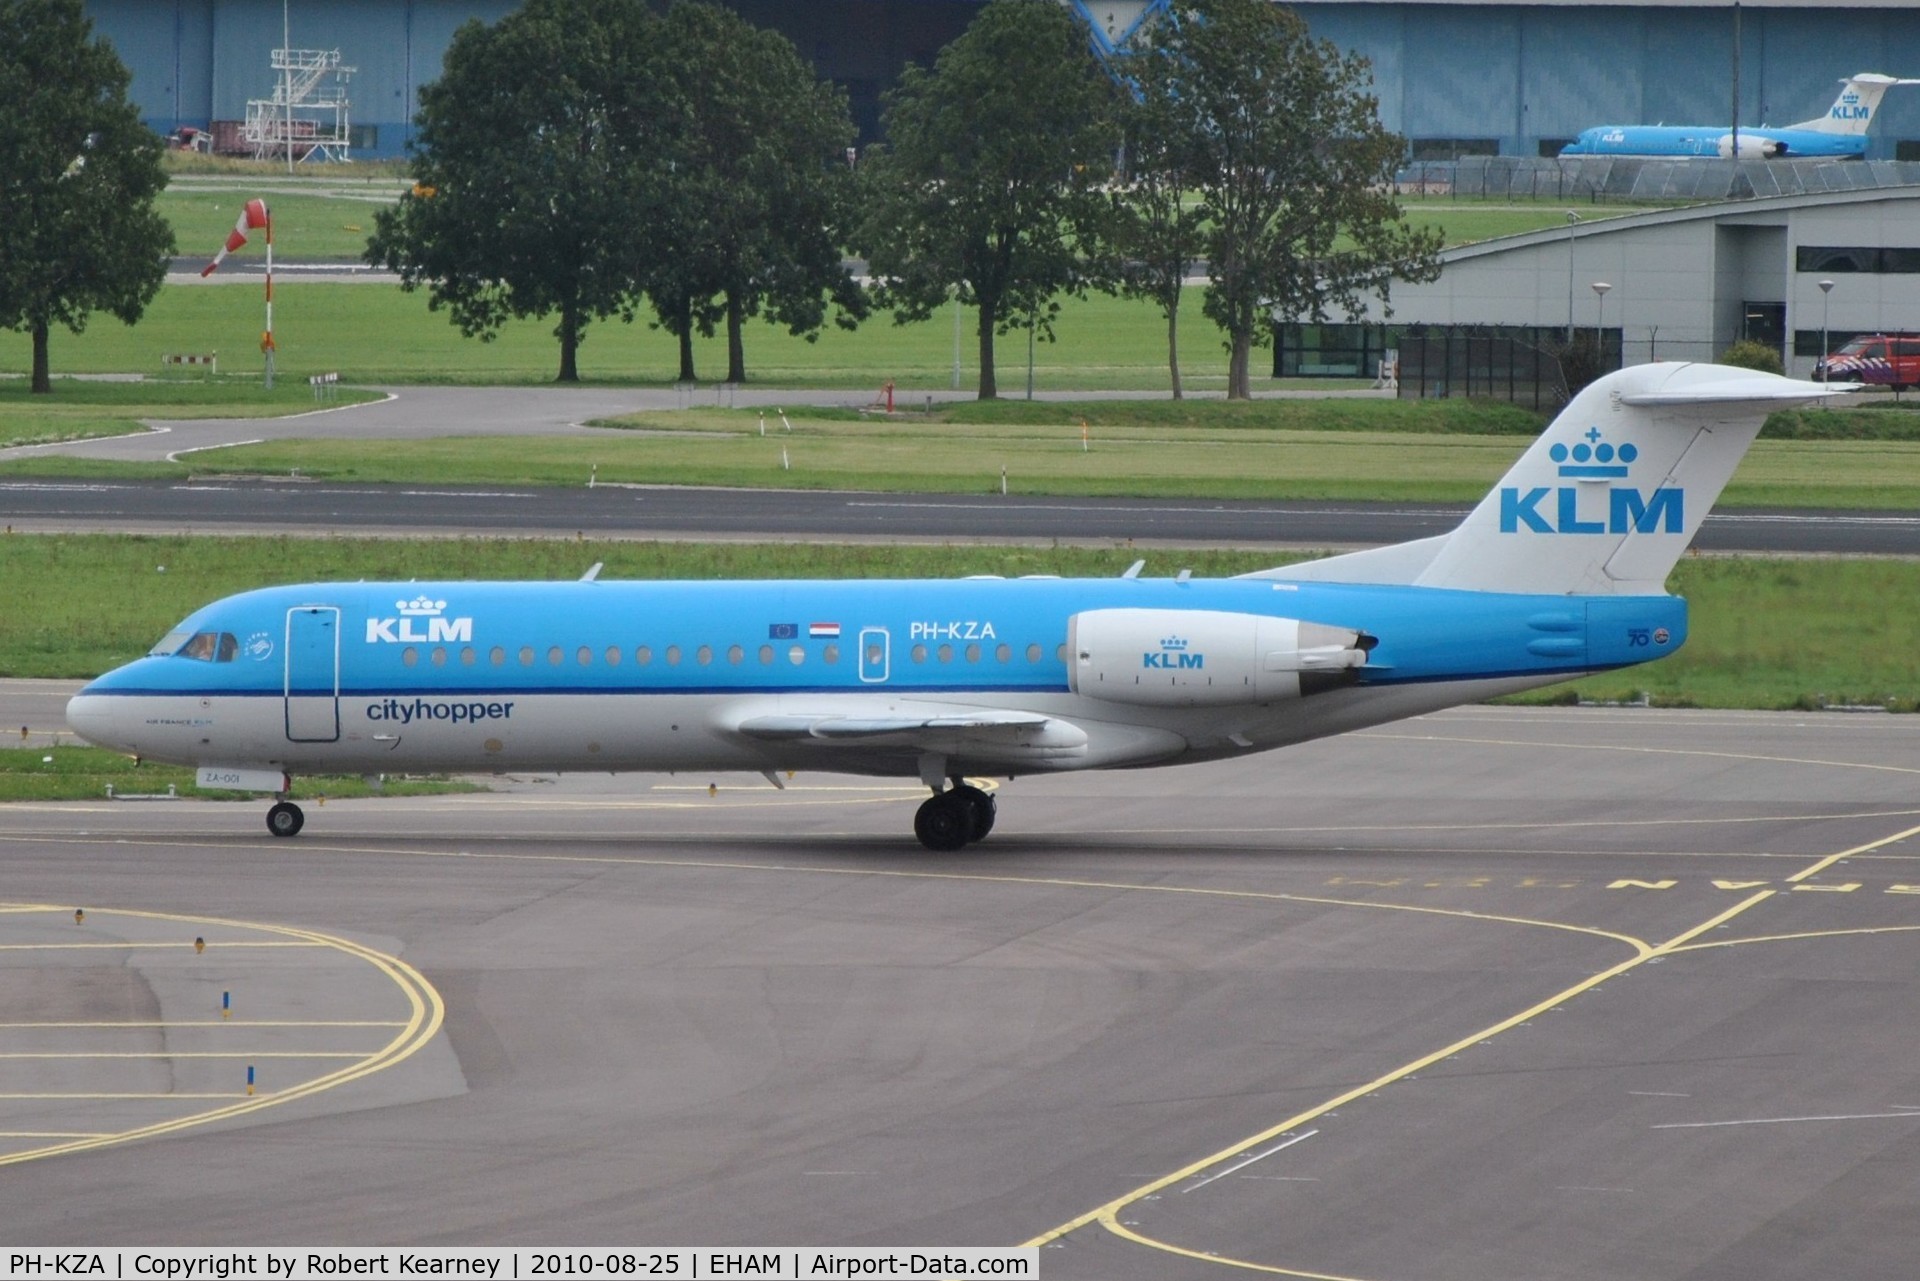 PH-KZA, 1996 Fokker 70 (F-28-070) C/N 11567, KLM cityhopper taxiing for take-off